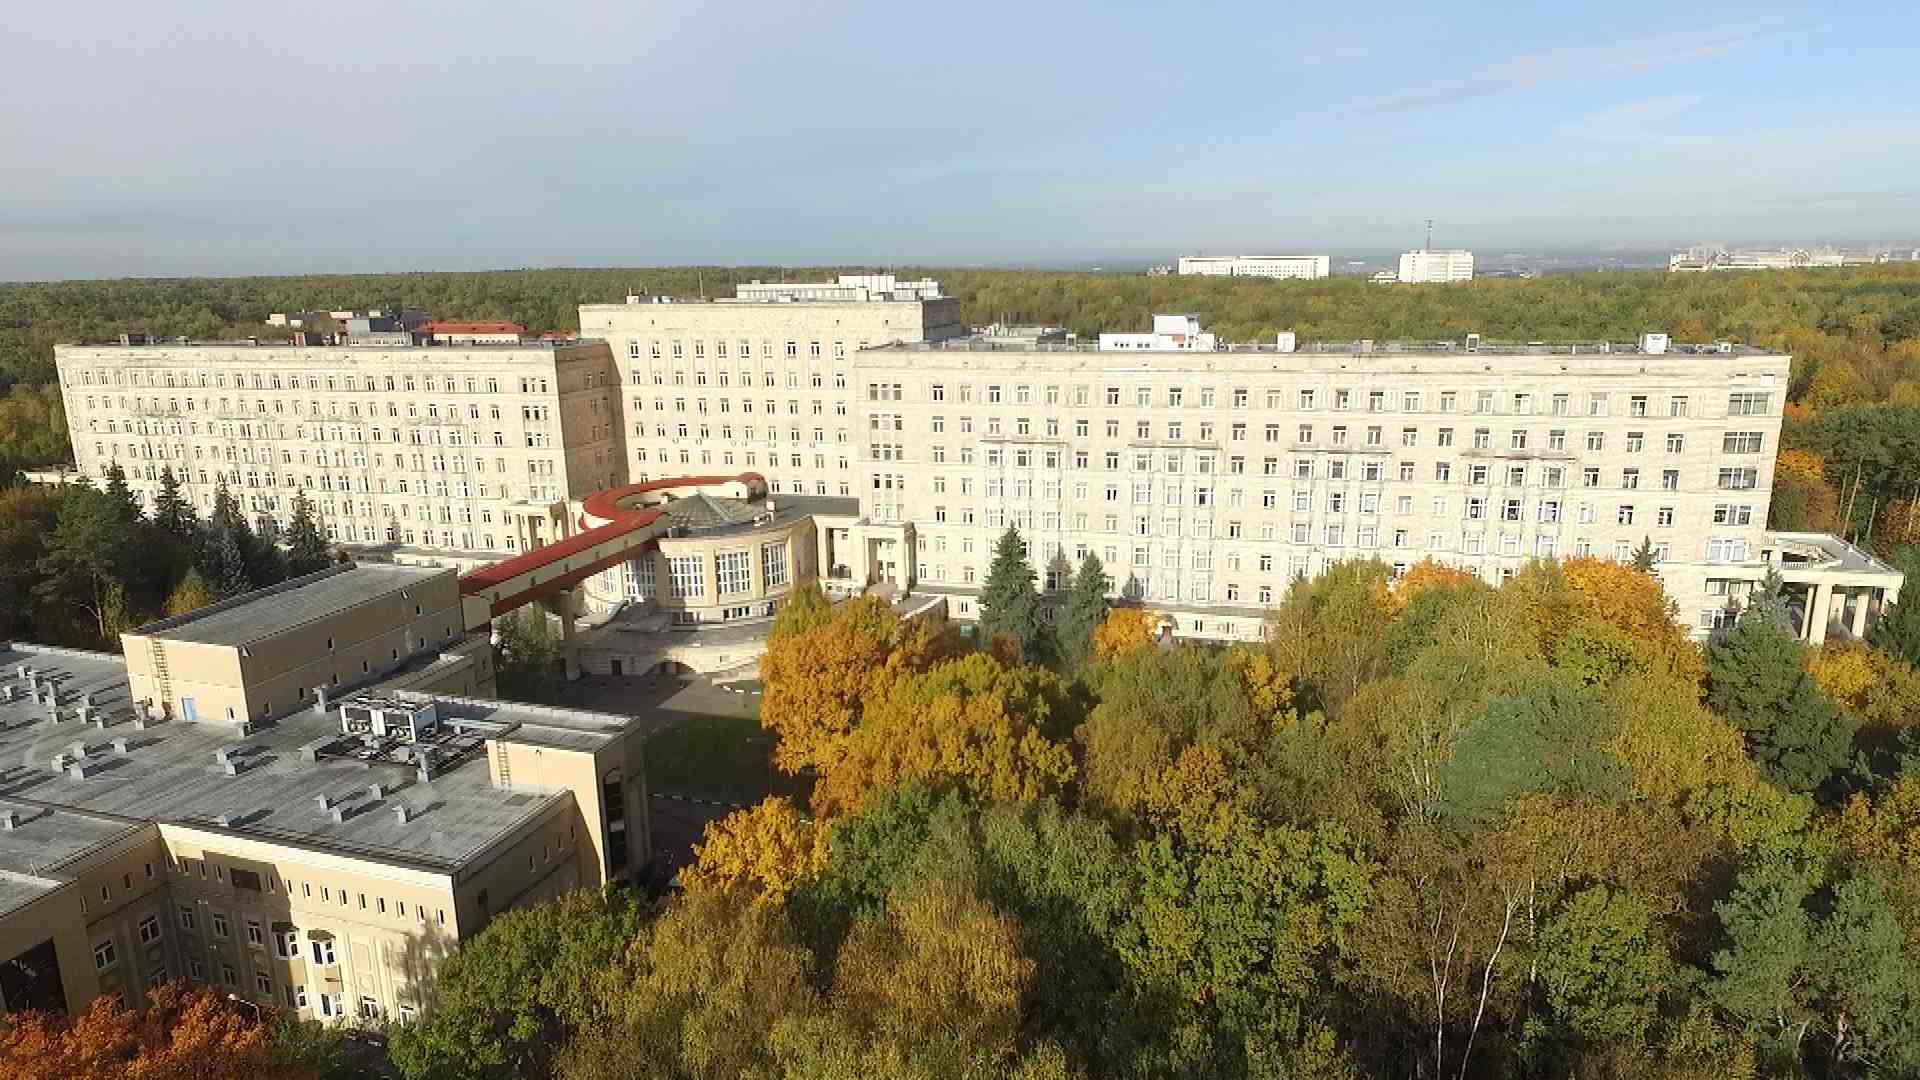 Those Damn Slippery Russian Hospital Windows – LUKoil Board Chief Falls From 6th Story To His Death